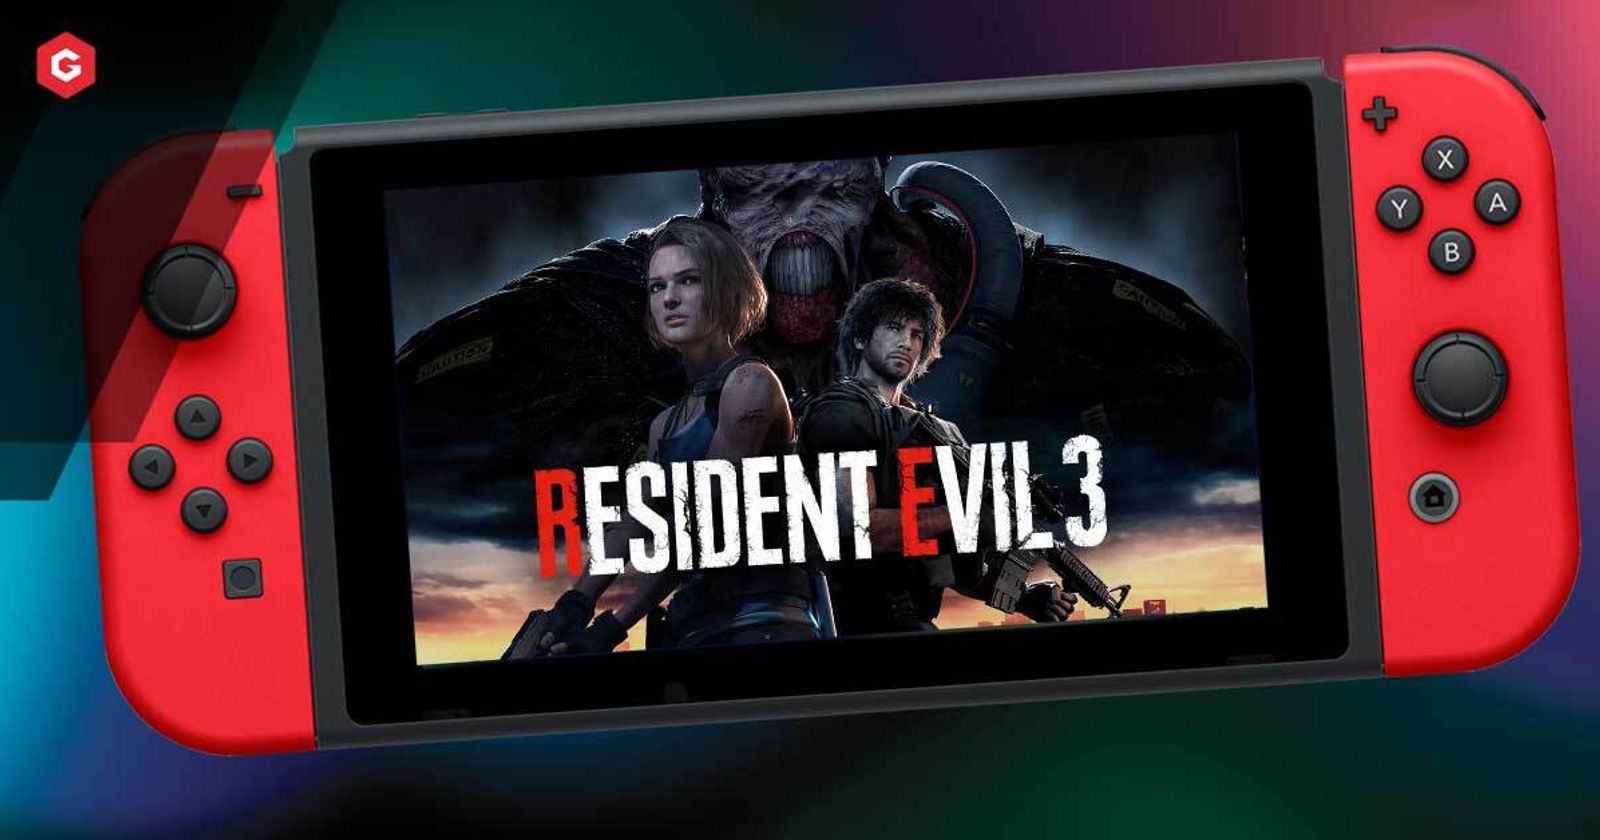 Resident Evil 3 looks to be next Nintendo Switch game using cloud